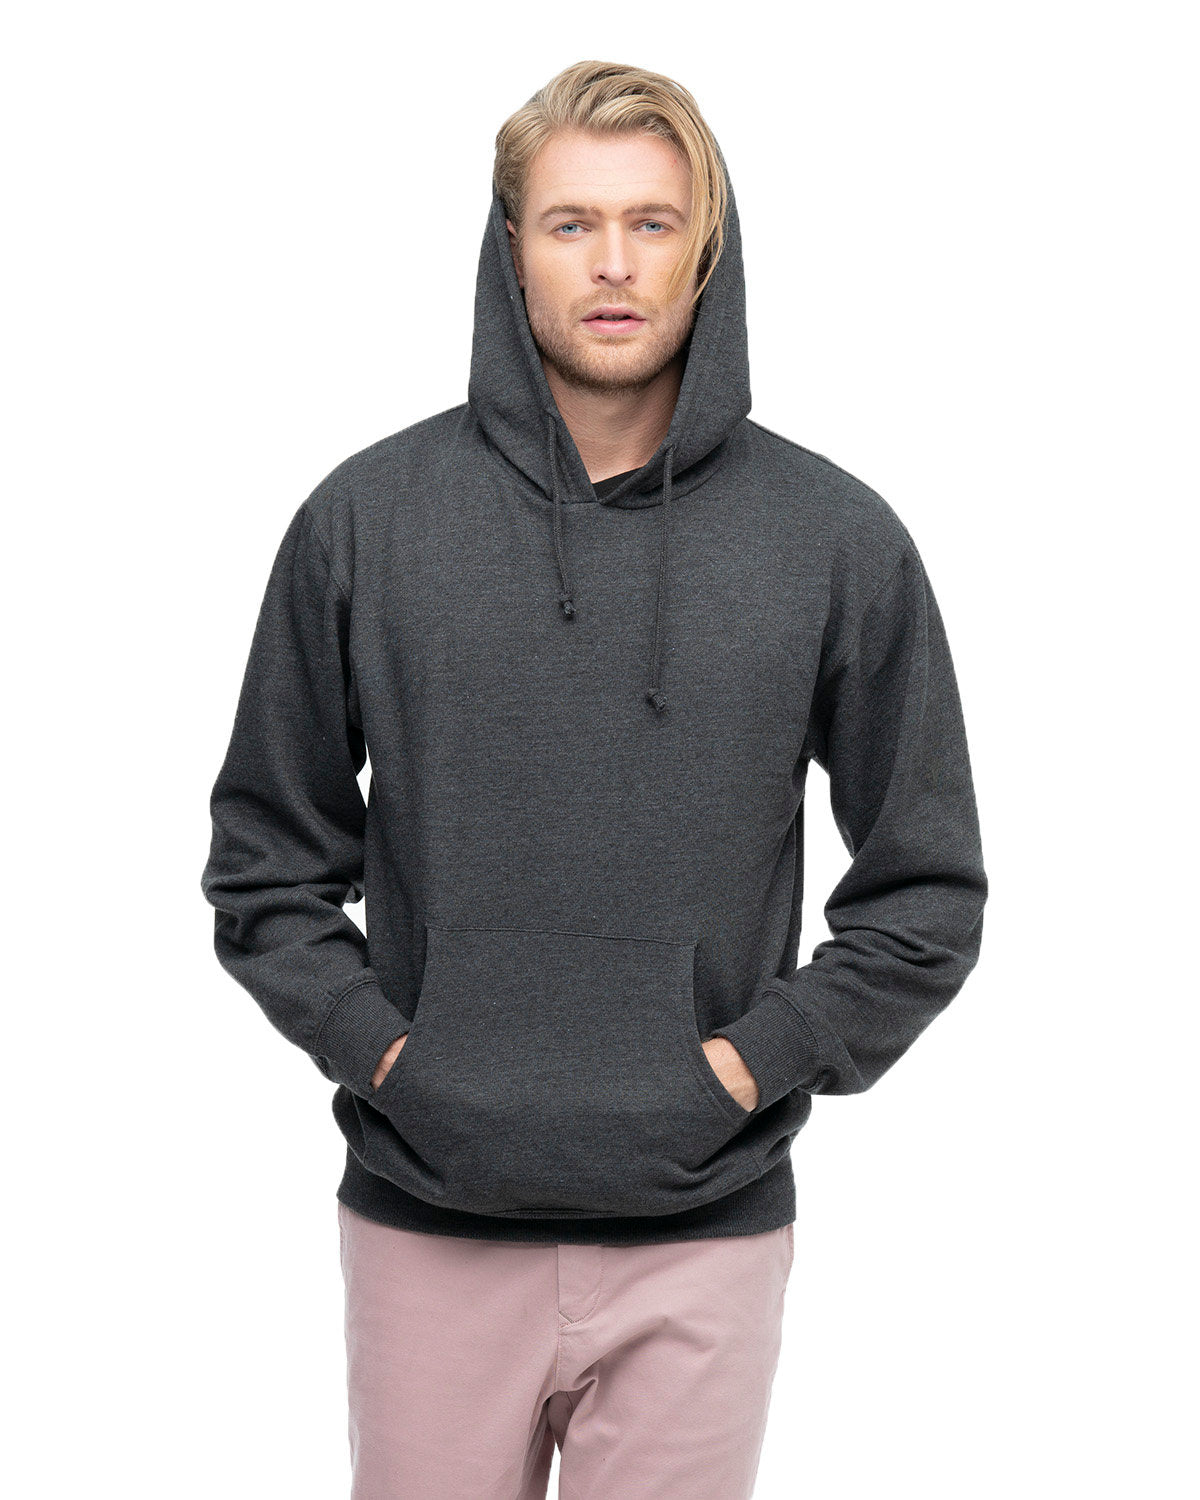 Sustainable Comfort and Style: Adult Organic/Recycled Heathered Fleece Pullover Hooded Sweatshirt by econscious